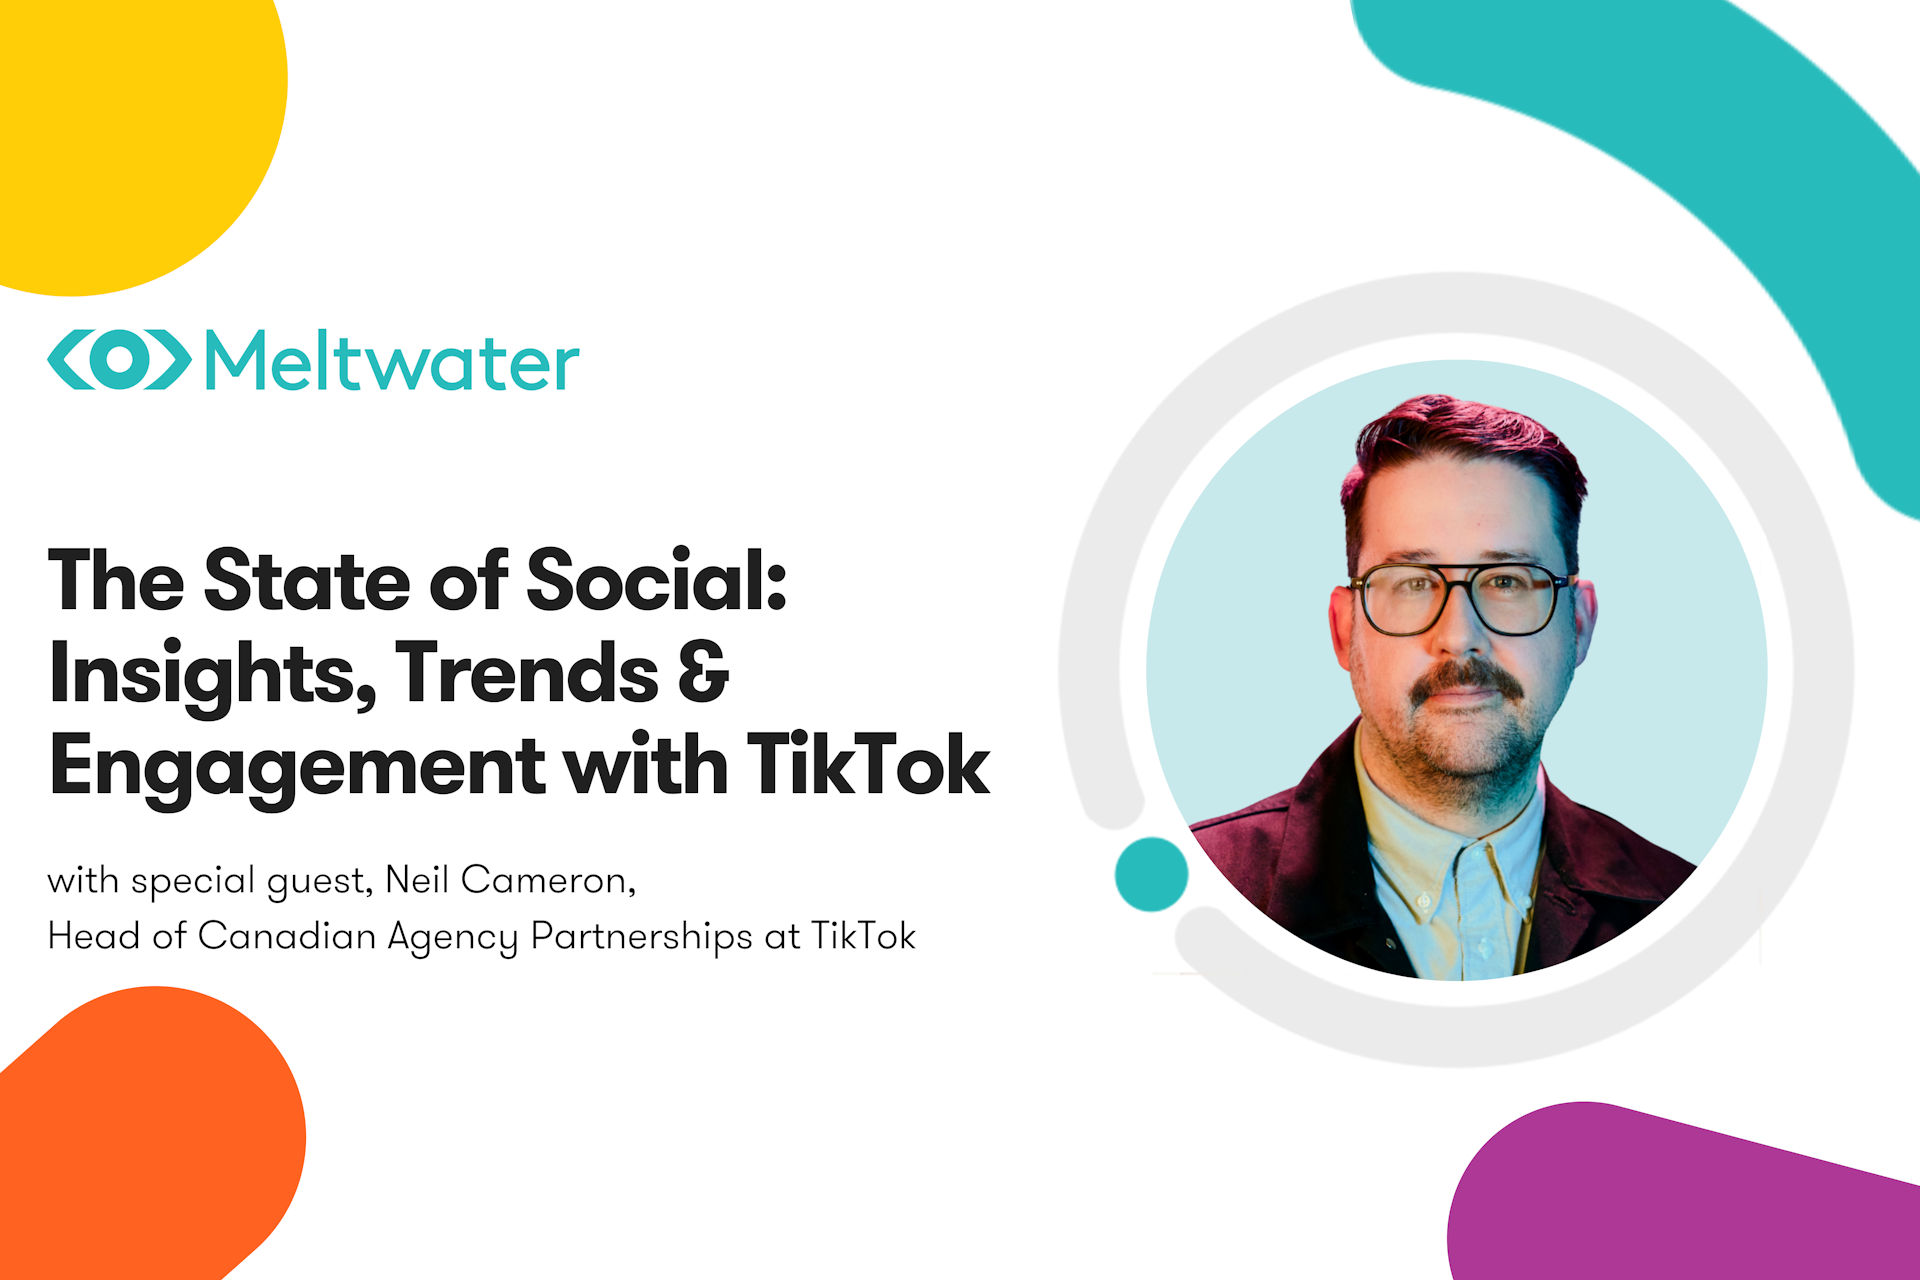 The State of Social: Insights, Trends & Engagement with TikTok